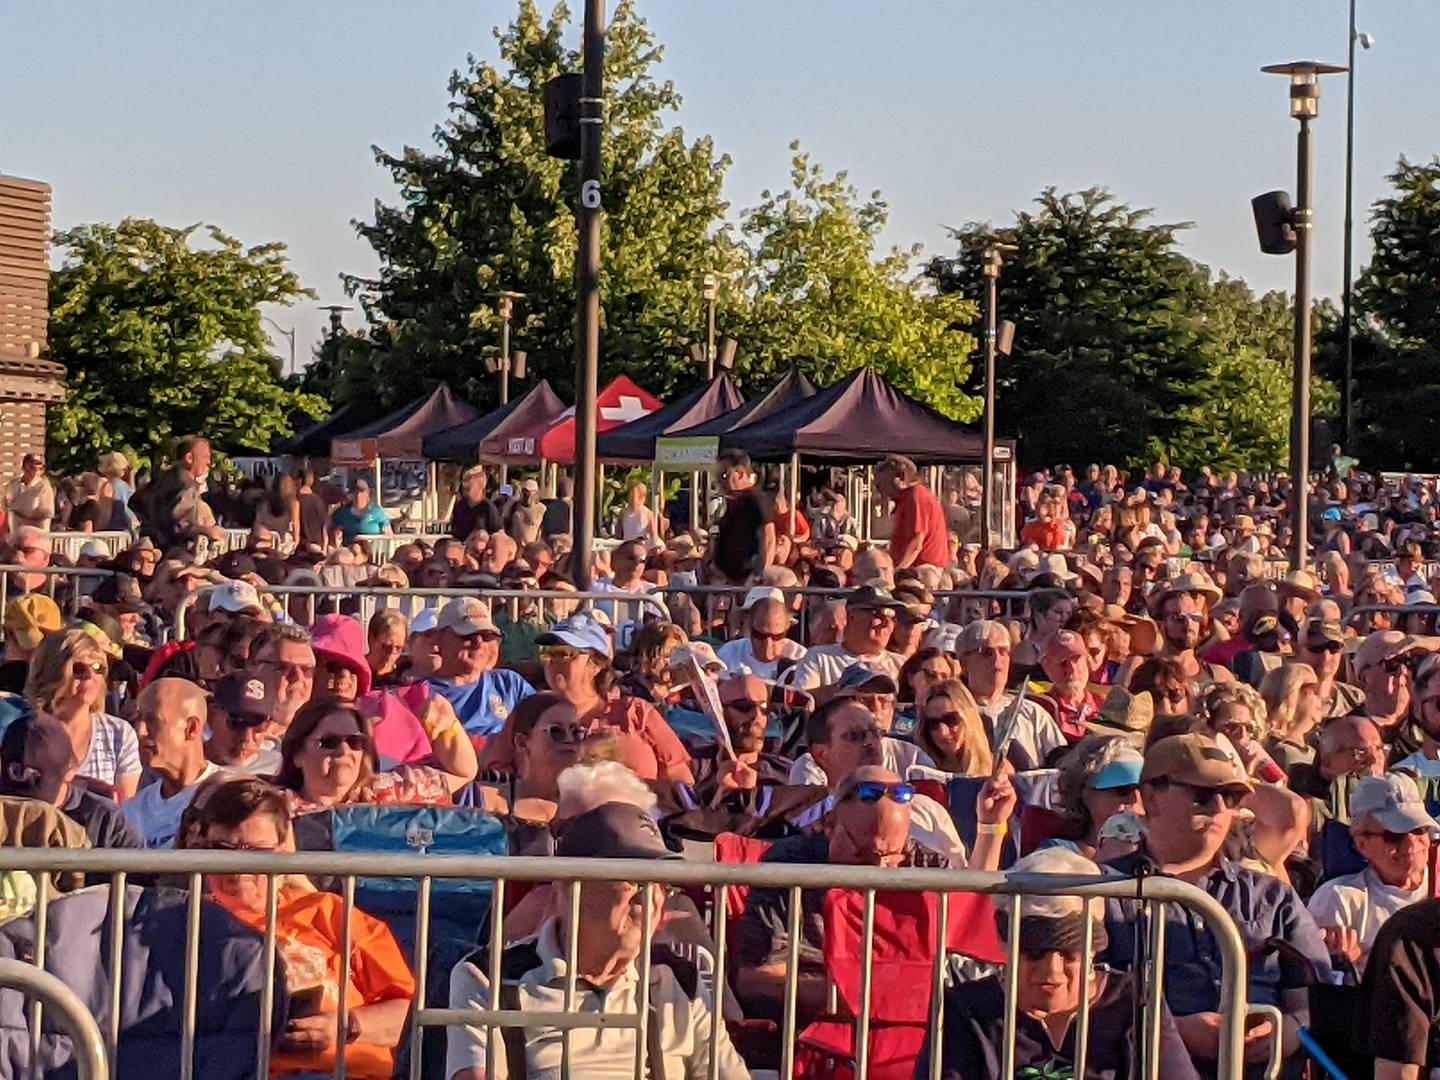 Thousands of people were at Thomas J. Weisner RiverEdge Park in Aurora Friday night watching Chicago’s own Shemekia Copeland and Kenny Wayne Shepherd perform during the return of Blues on the Fox, now in its 24th year. The last Blues on the Fox festival had been in 2019.